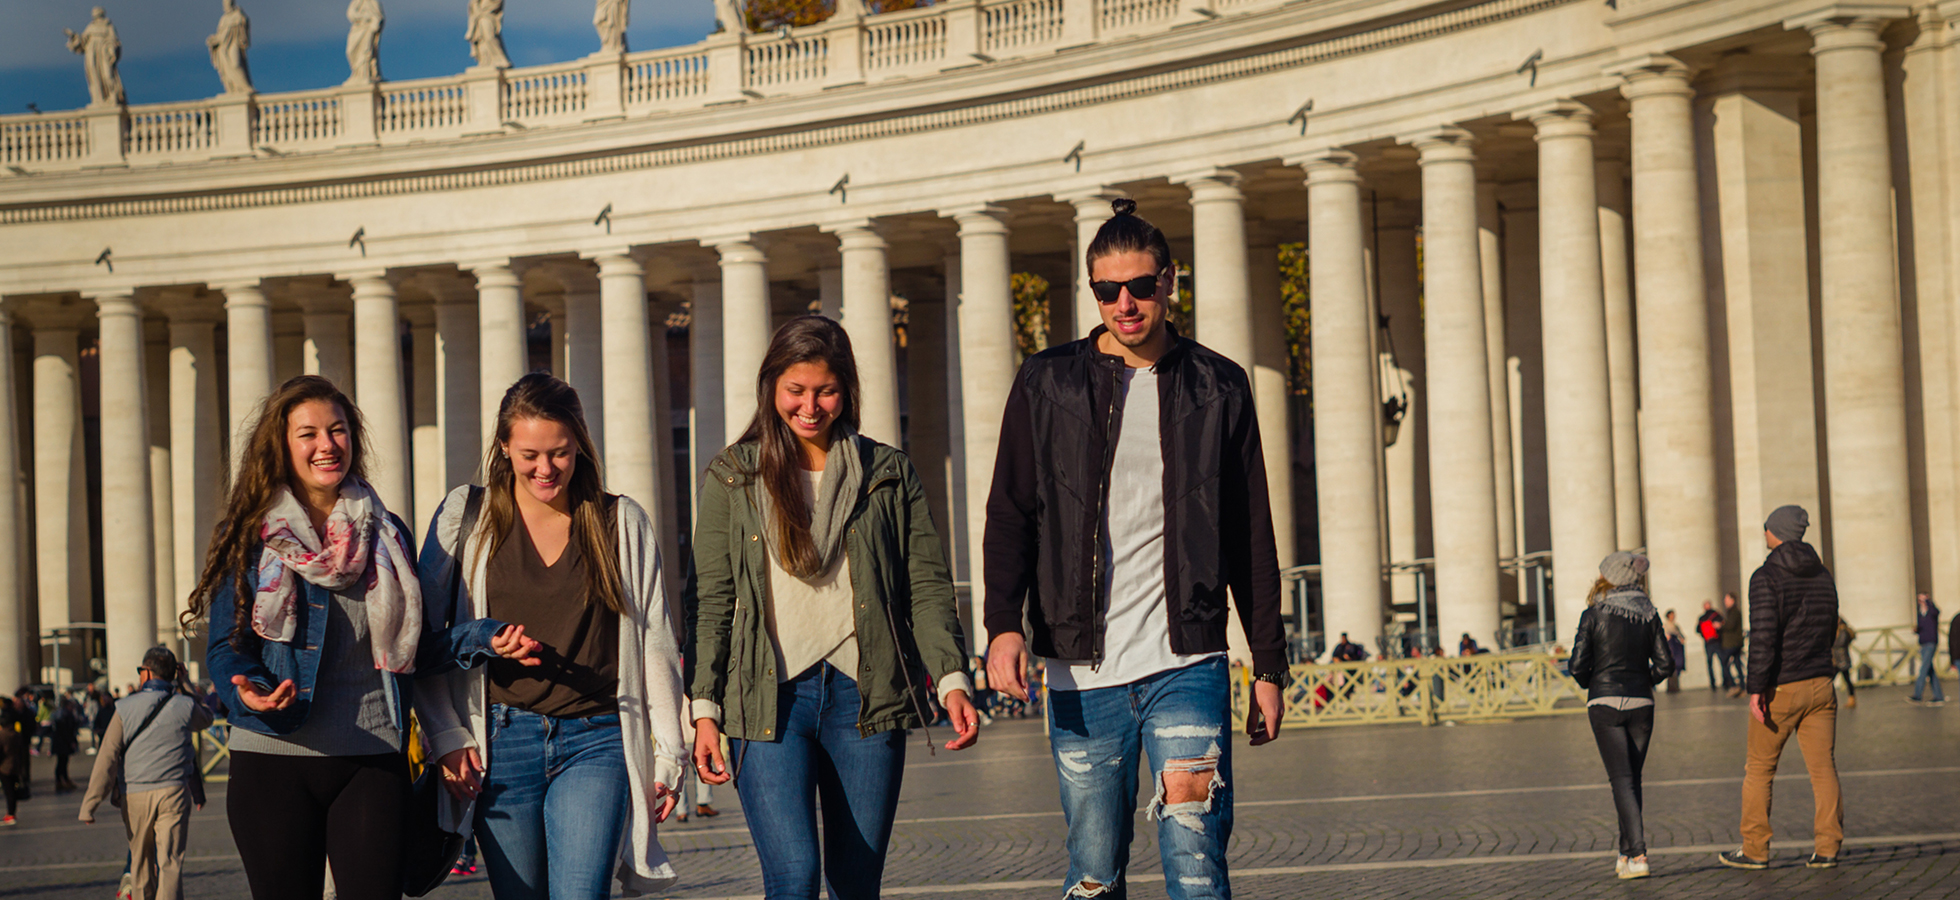 Students enrolled at Assumption's campus in Rome, Italy spend some time in St. Peter's Square at the Vatican.